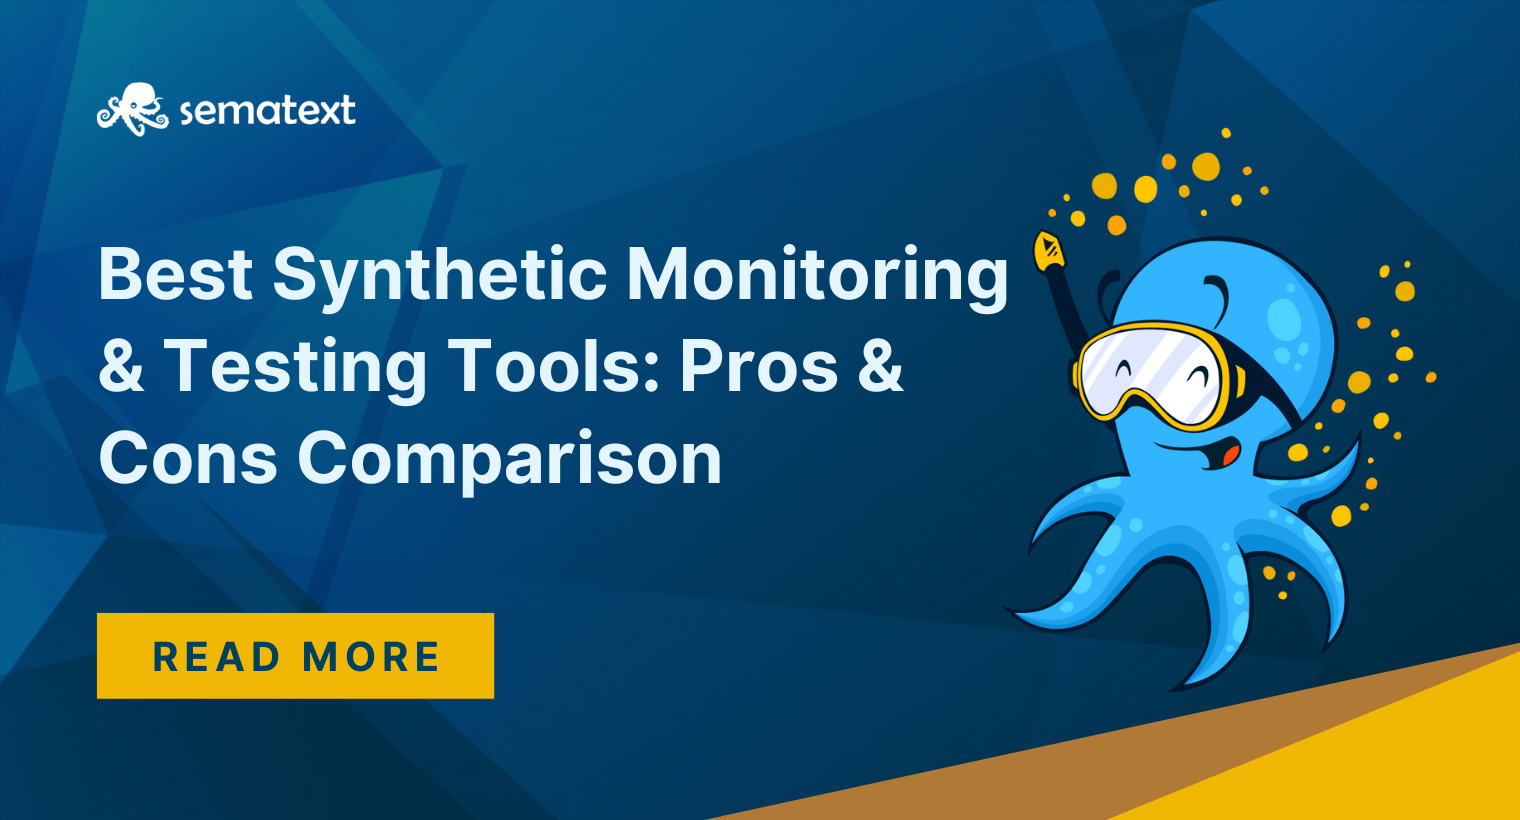 10 Best Synthetic Monitoring & Testing Tools of 2022: Pros & Cons Comparison